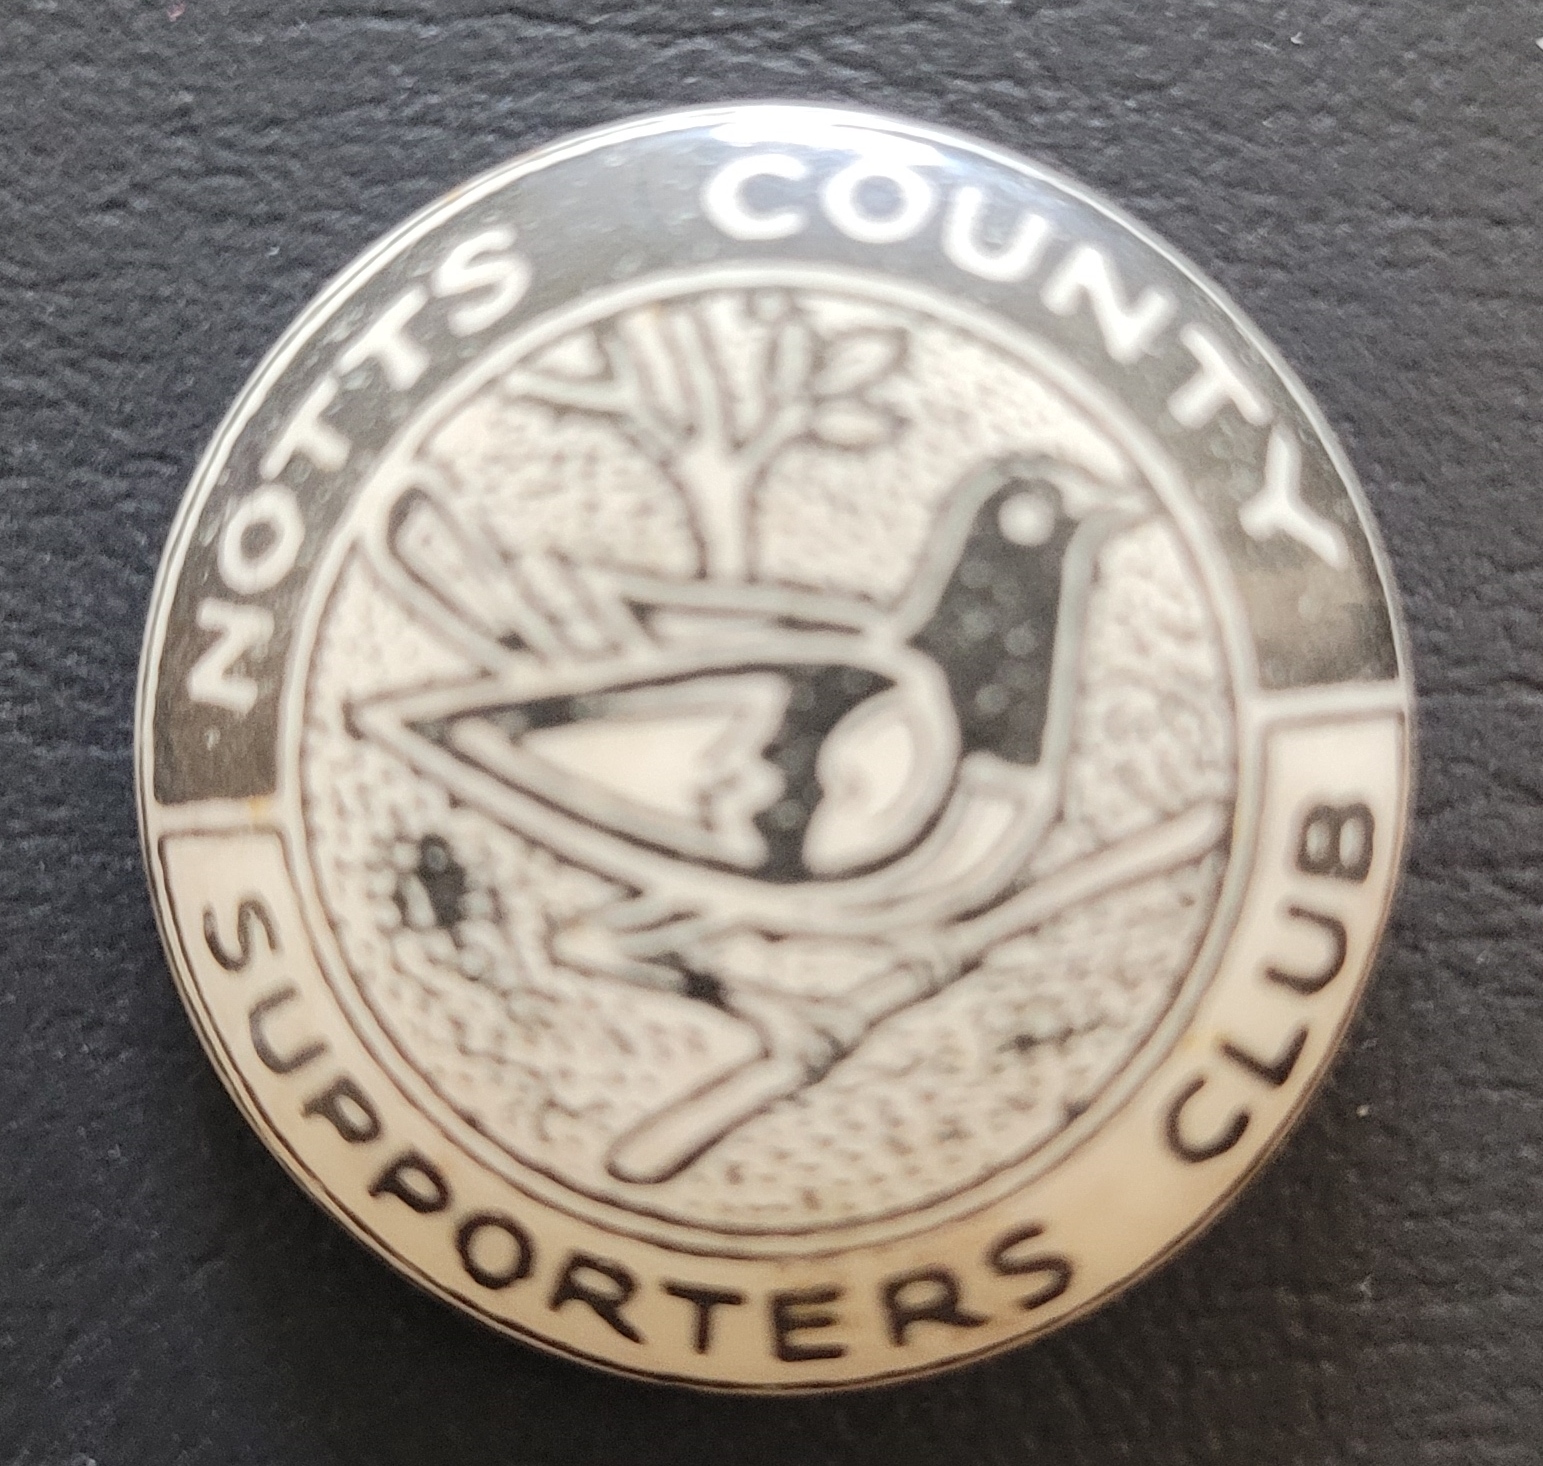 VINTAGE NOTTS COUNTY SUPPORTERS CLUB TIN BADGE